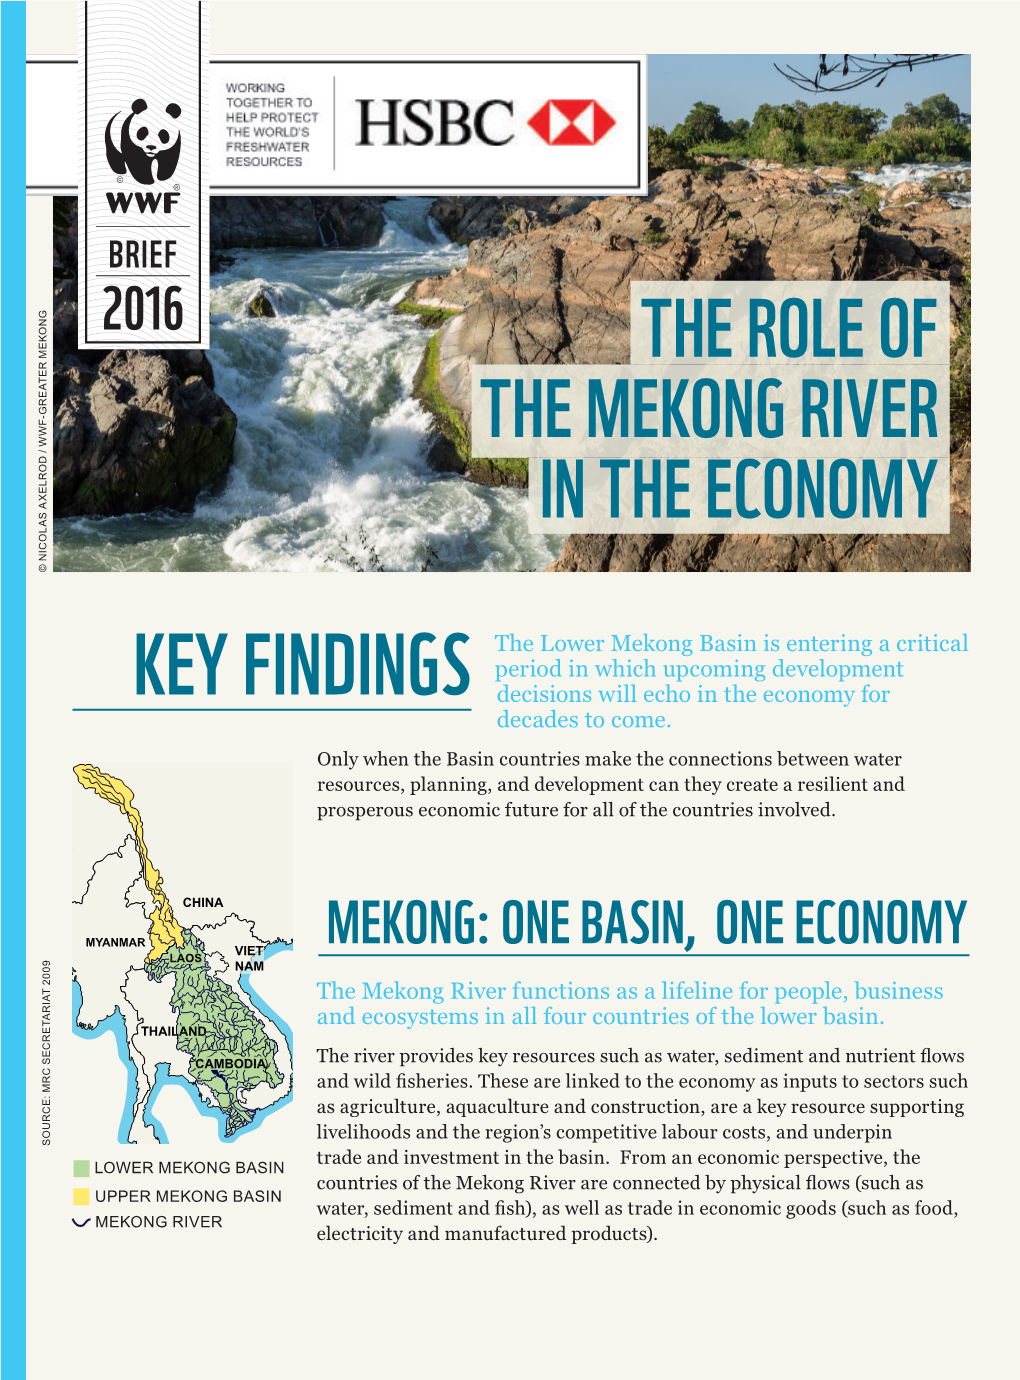 Economy of the Mekong River